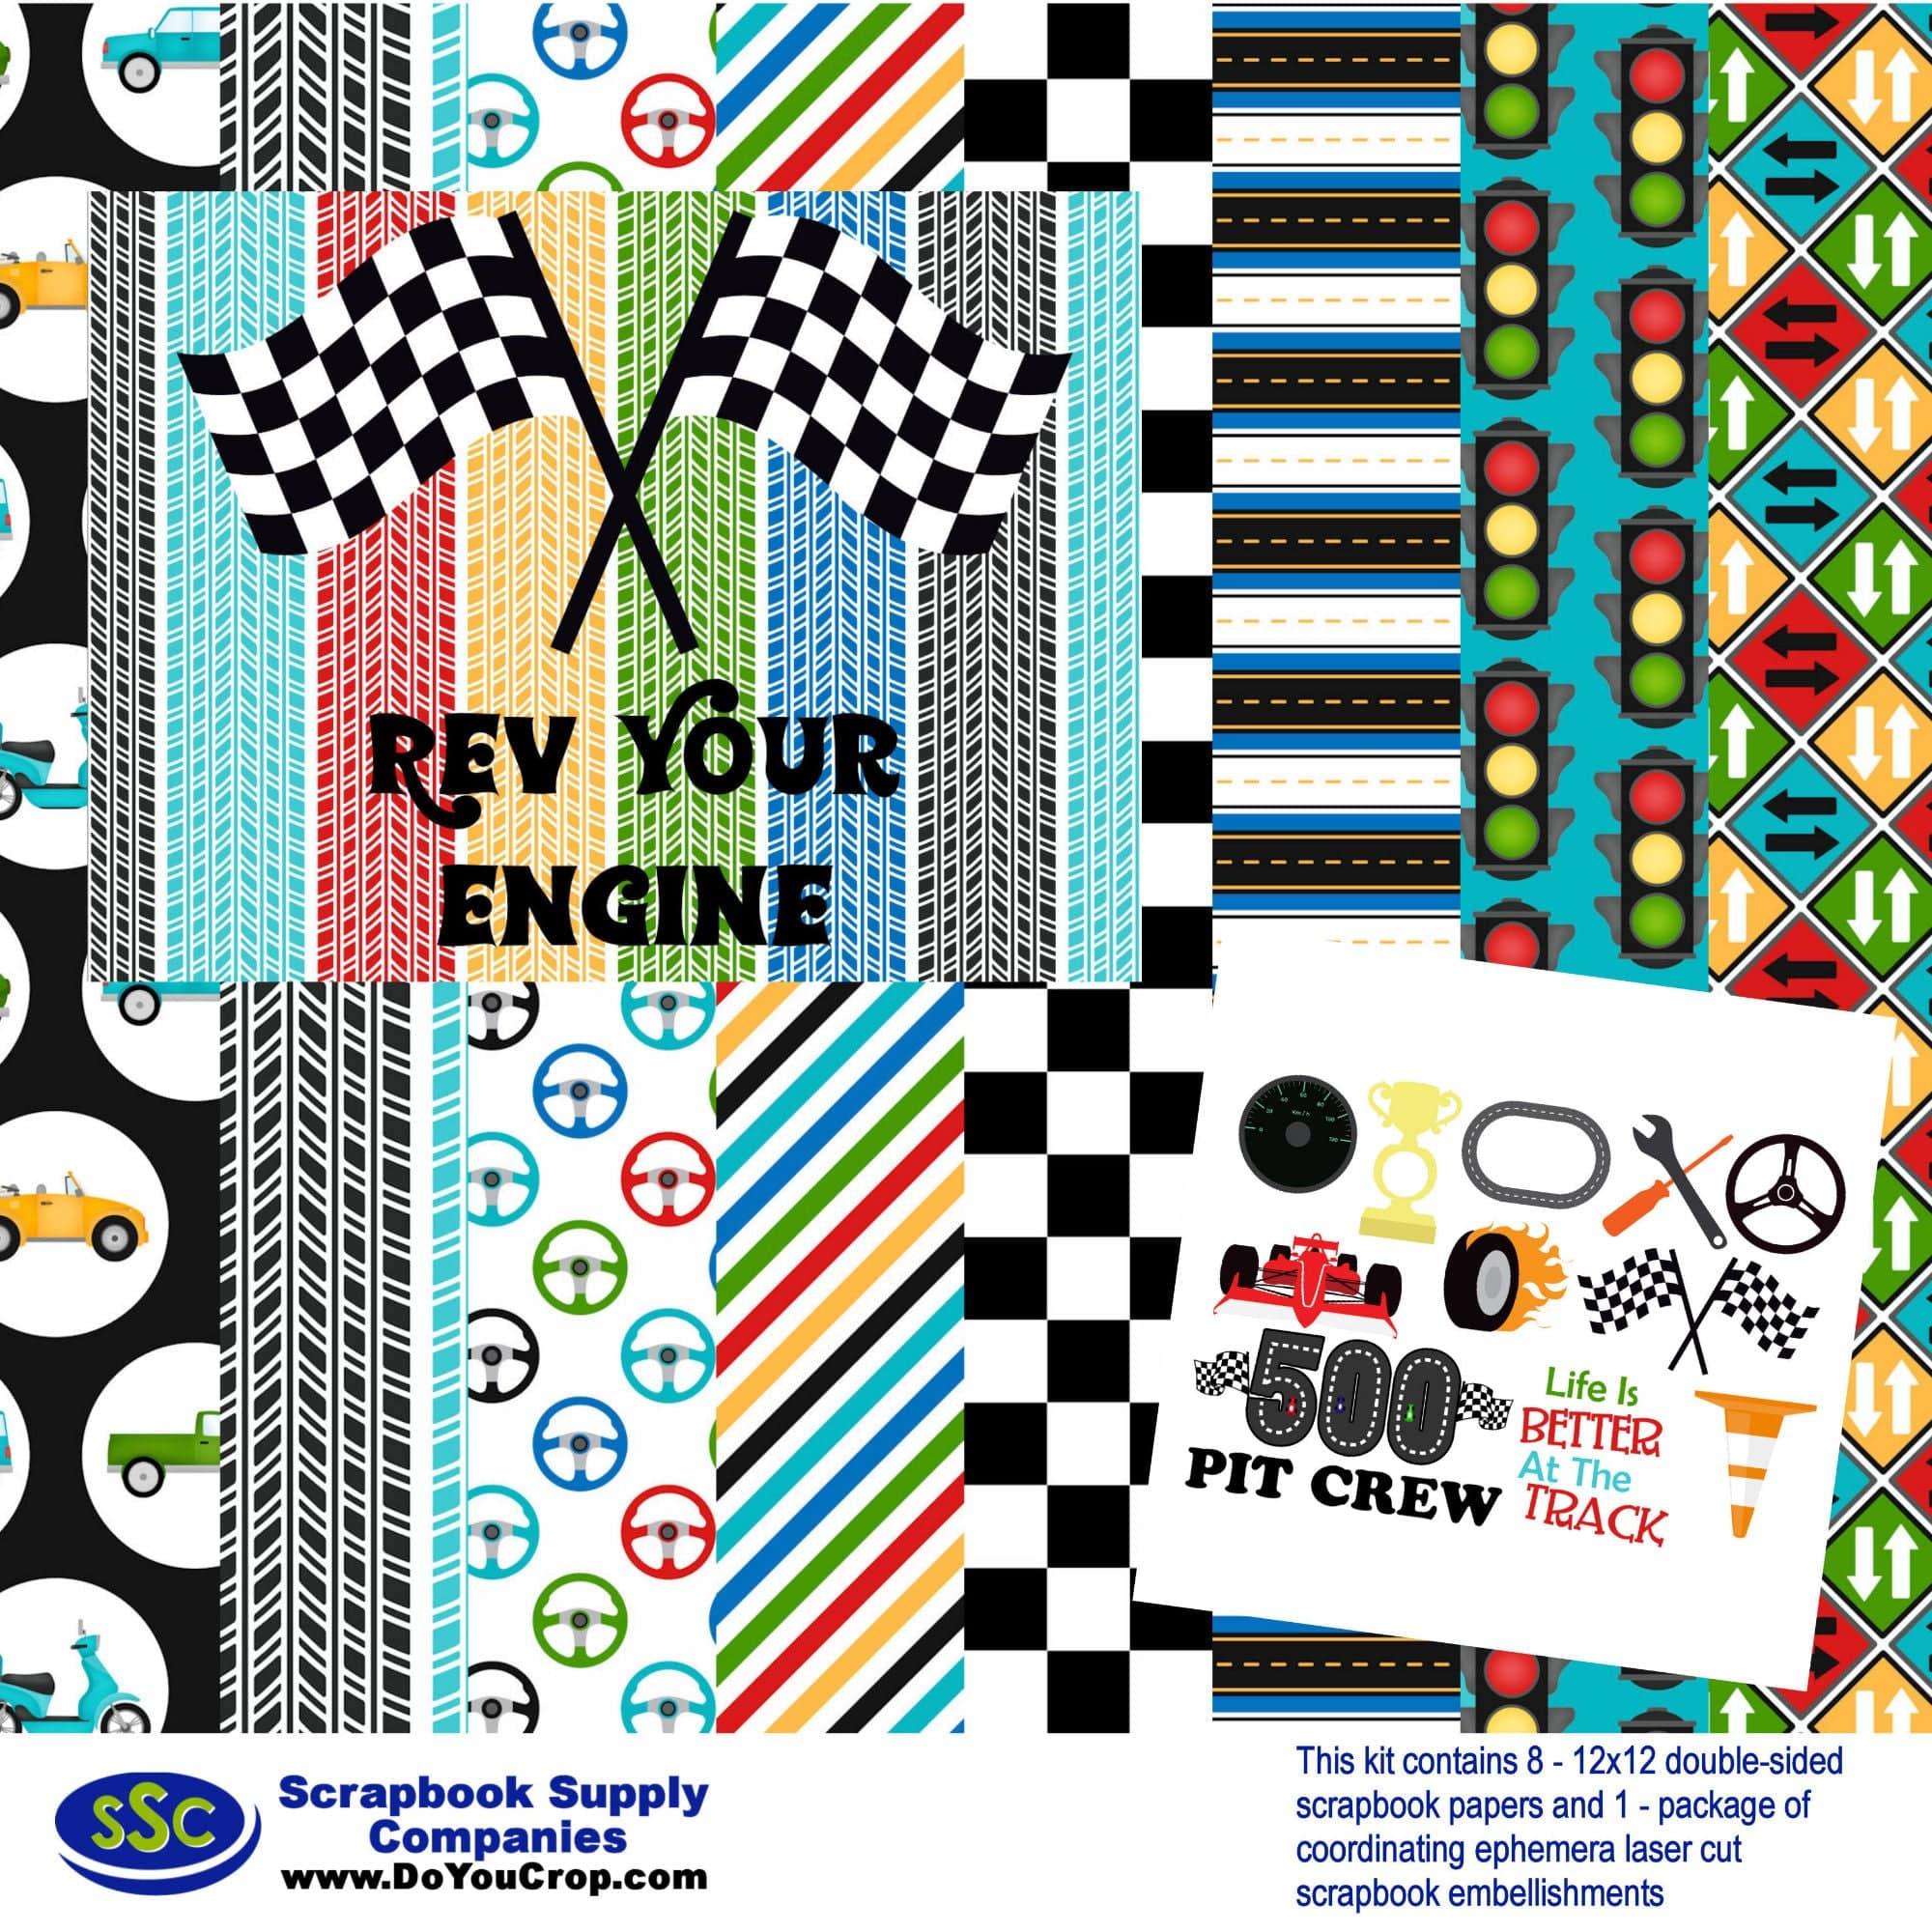 Rev Your Engine 12 x 12 Scrapbook Paper & Embellishment Kit by SSC Designs